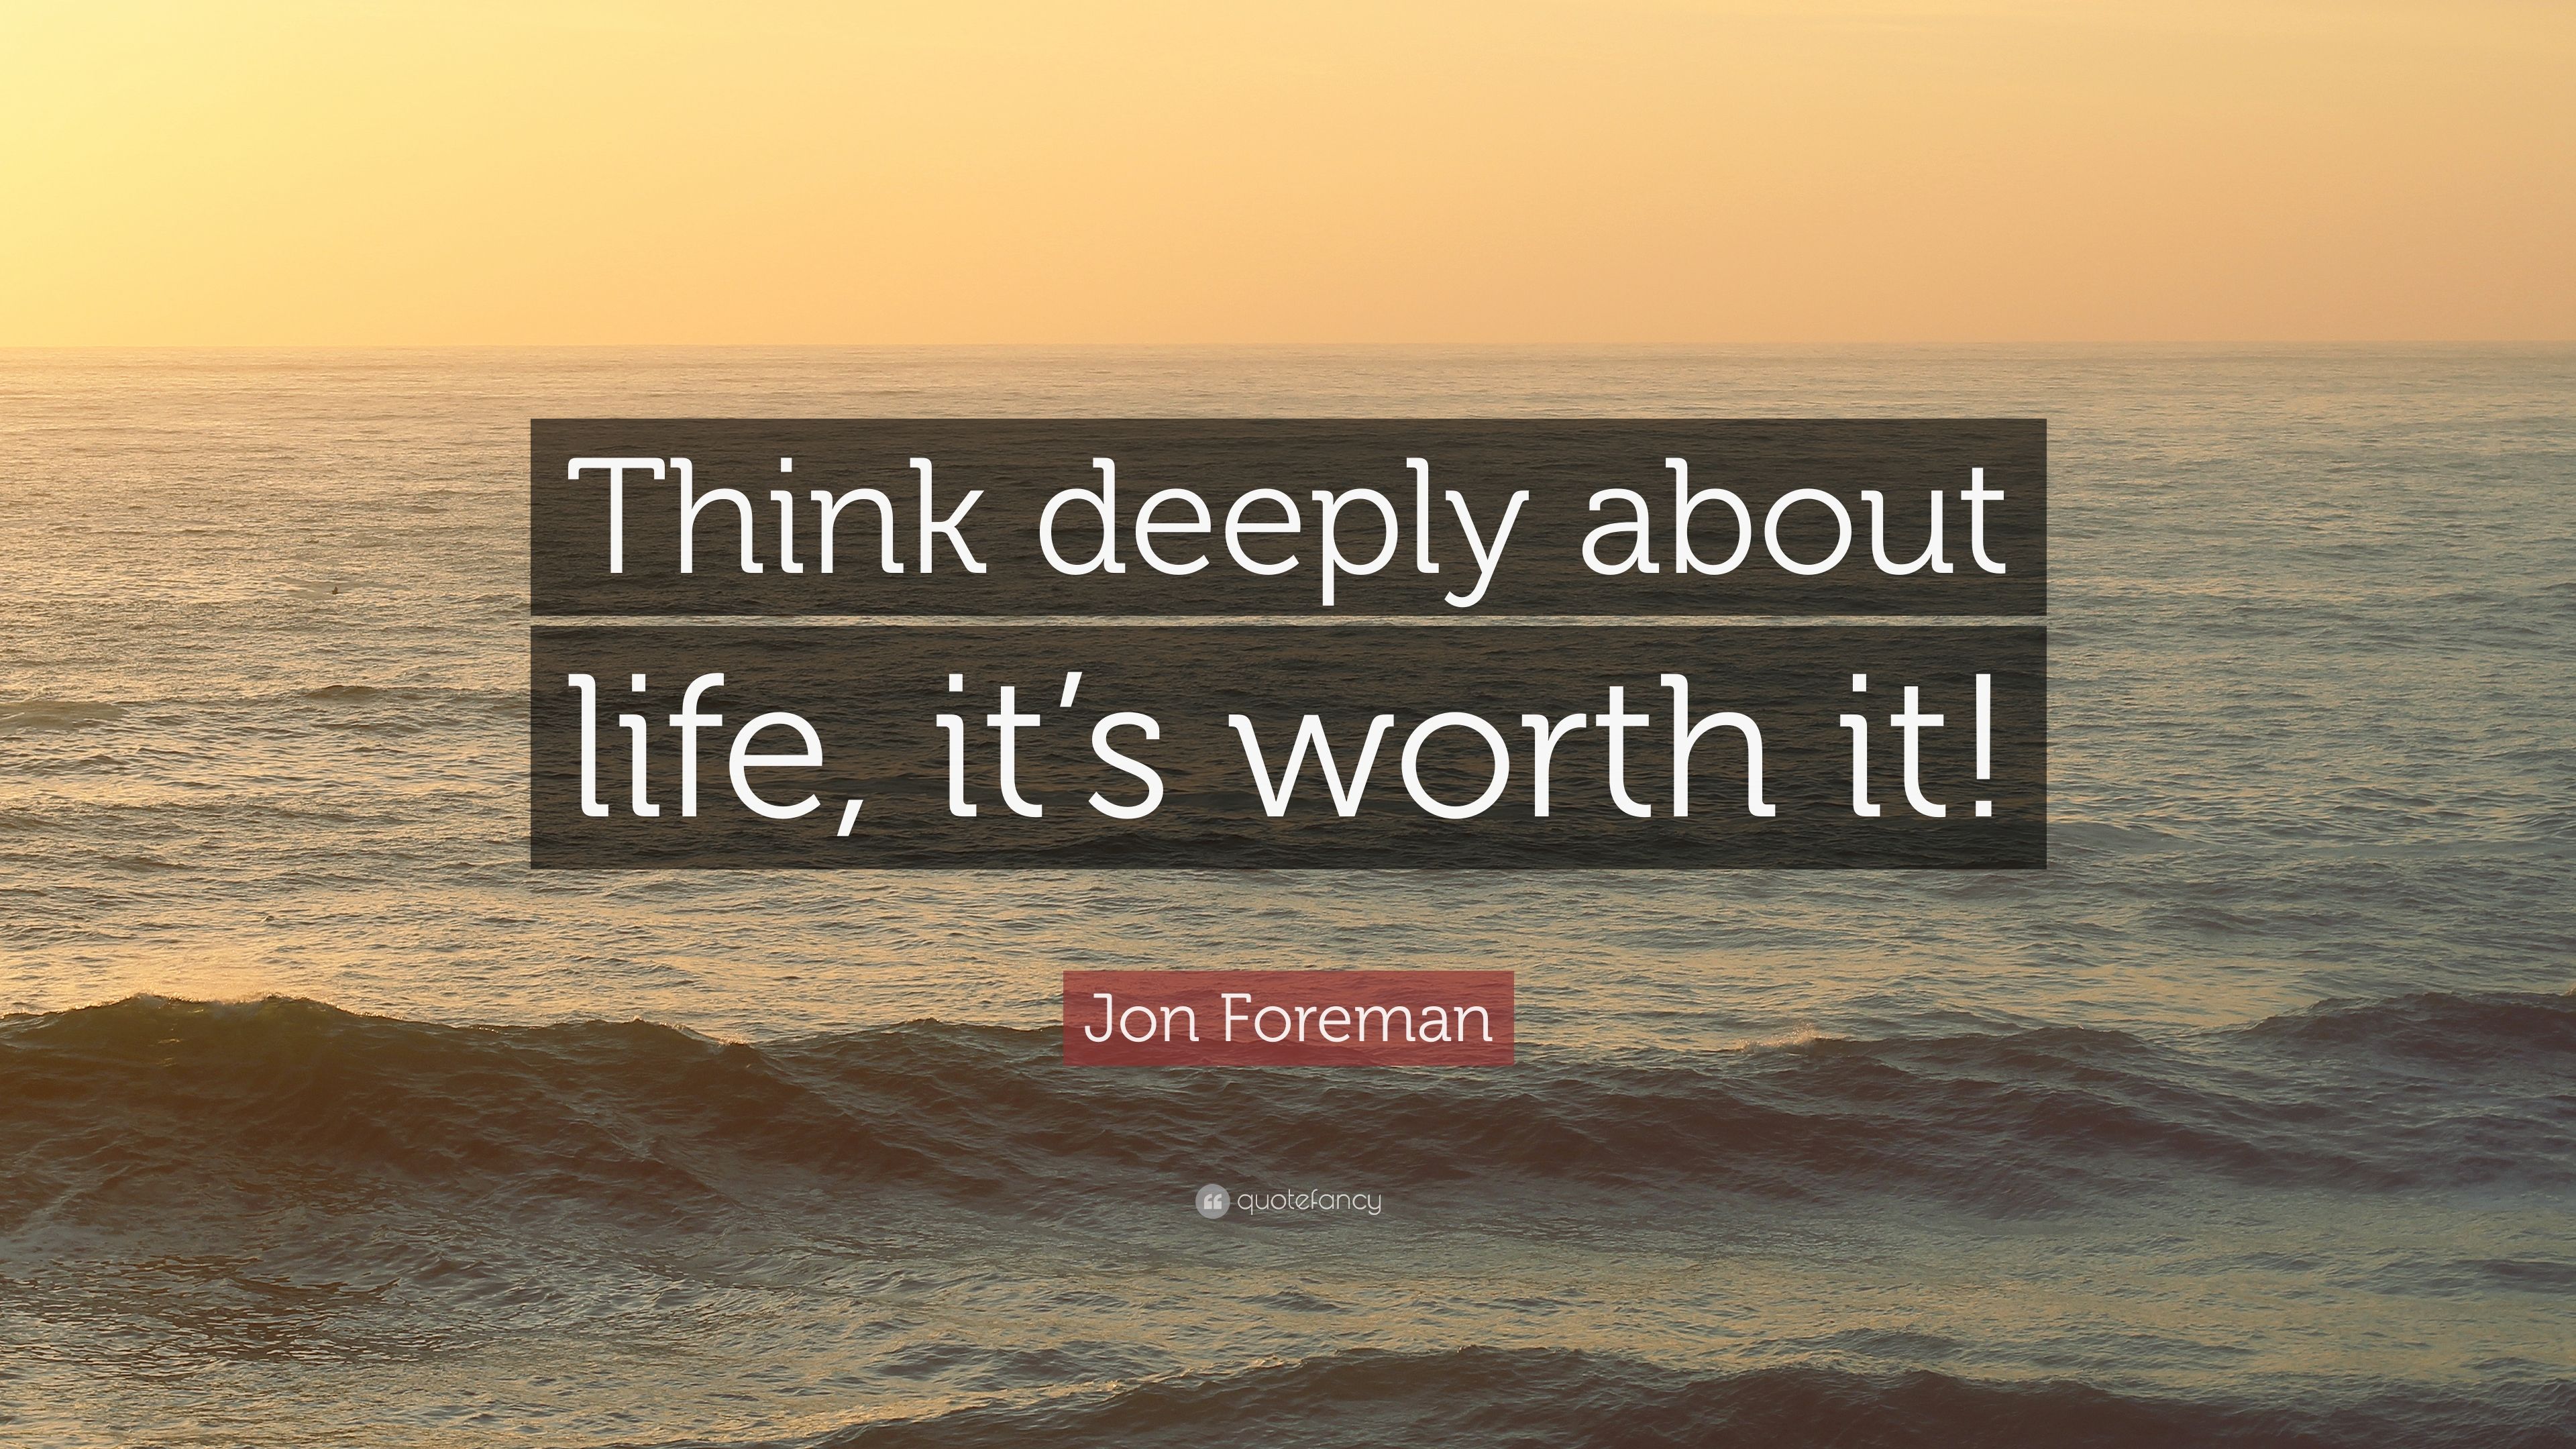 Jon Foreman Quote: “Think deeply about life, it's worth it!” 7